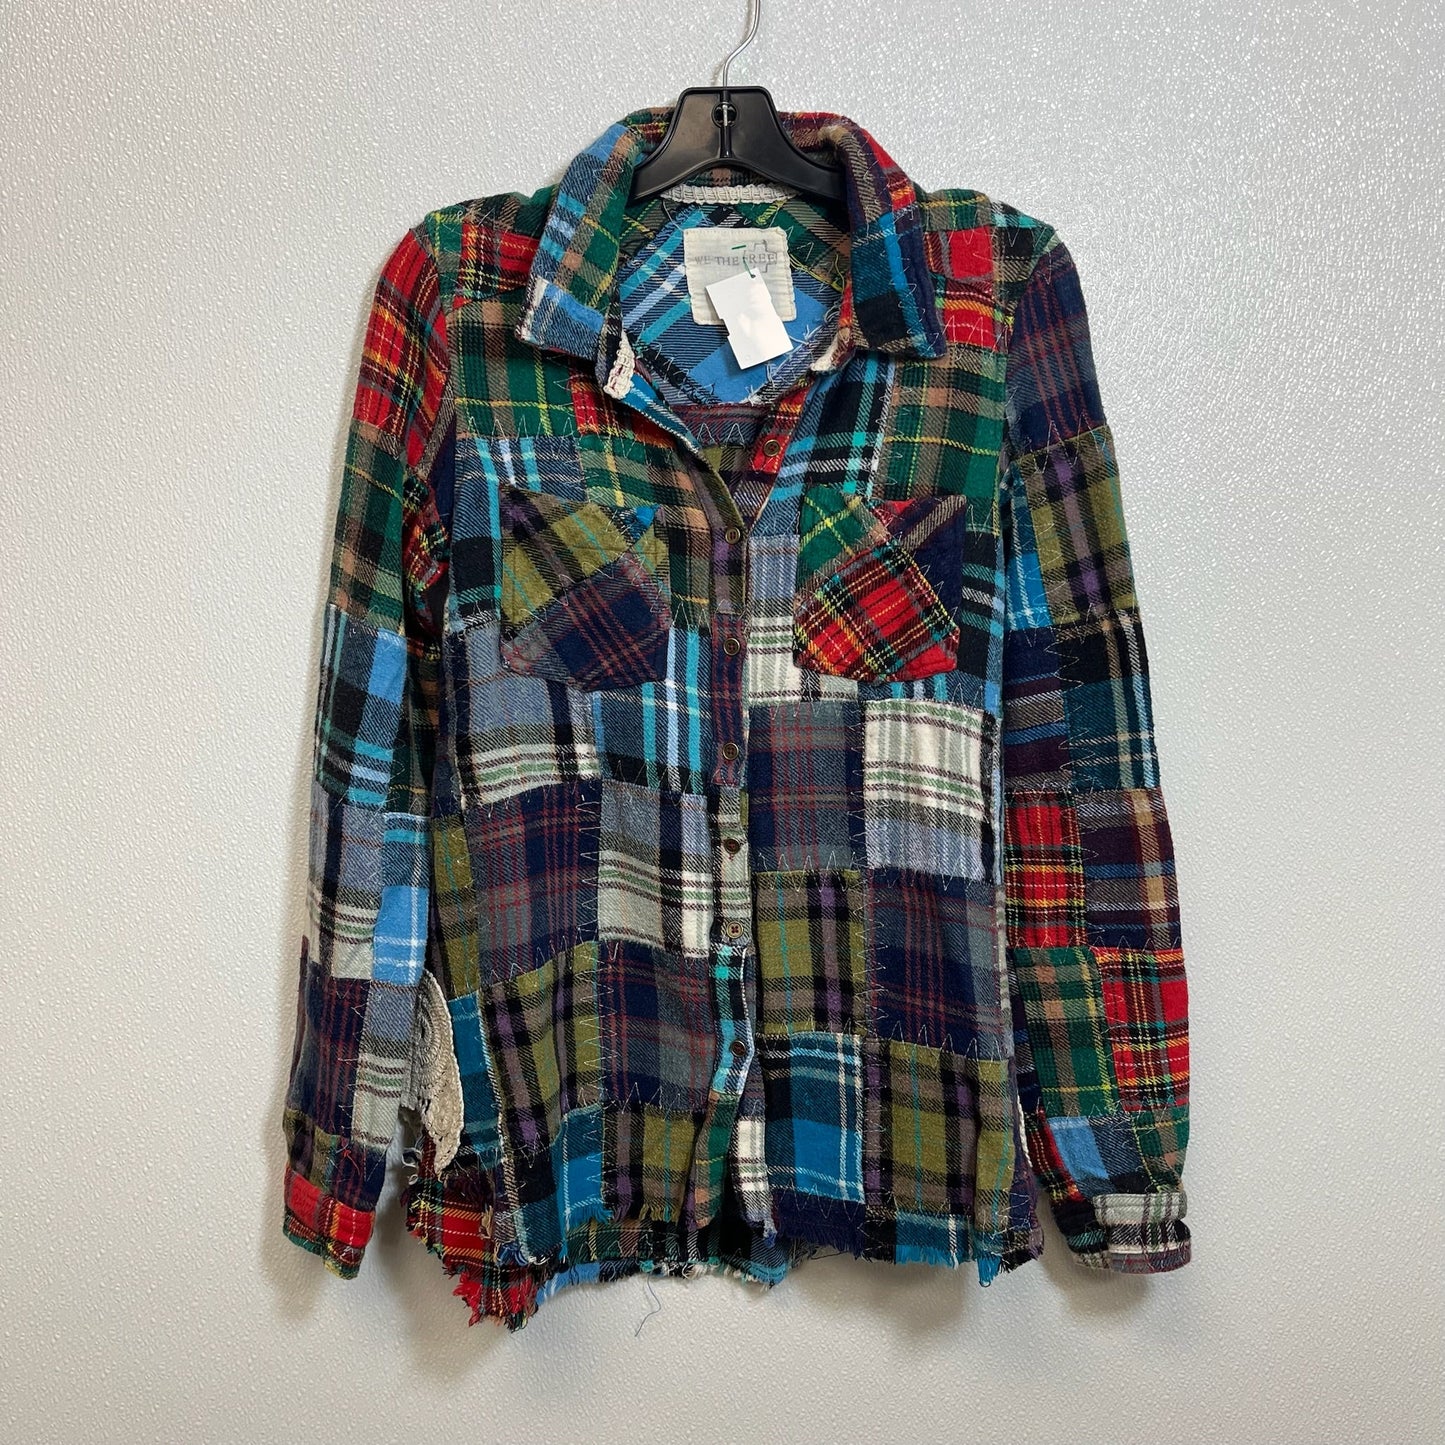 Plaid Top Long Sleeve We The Free, Size S